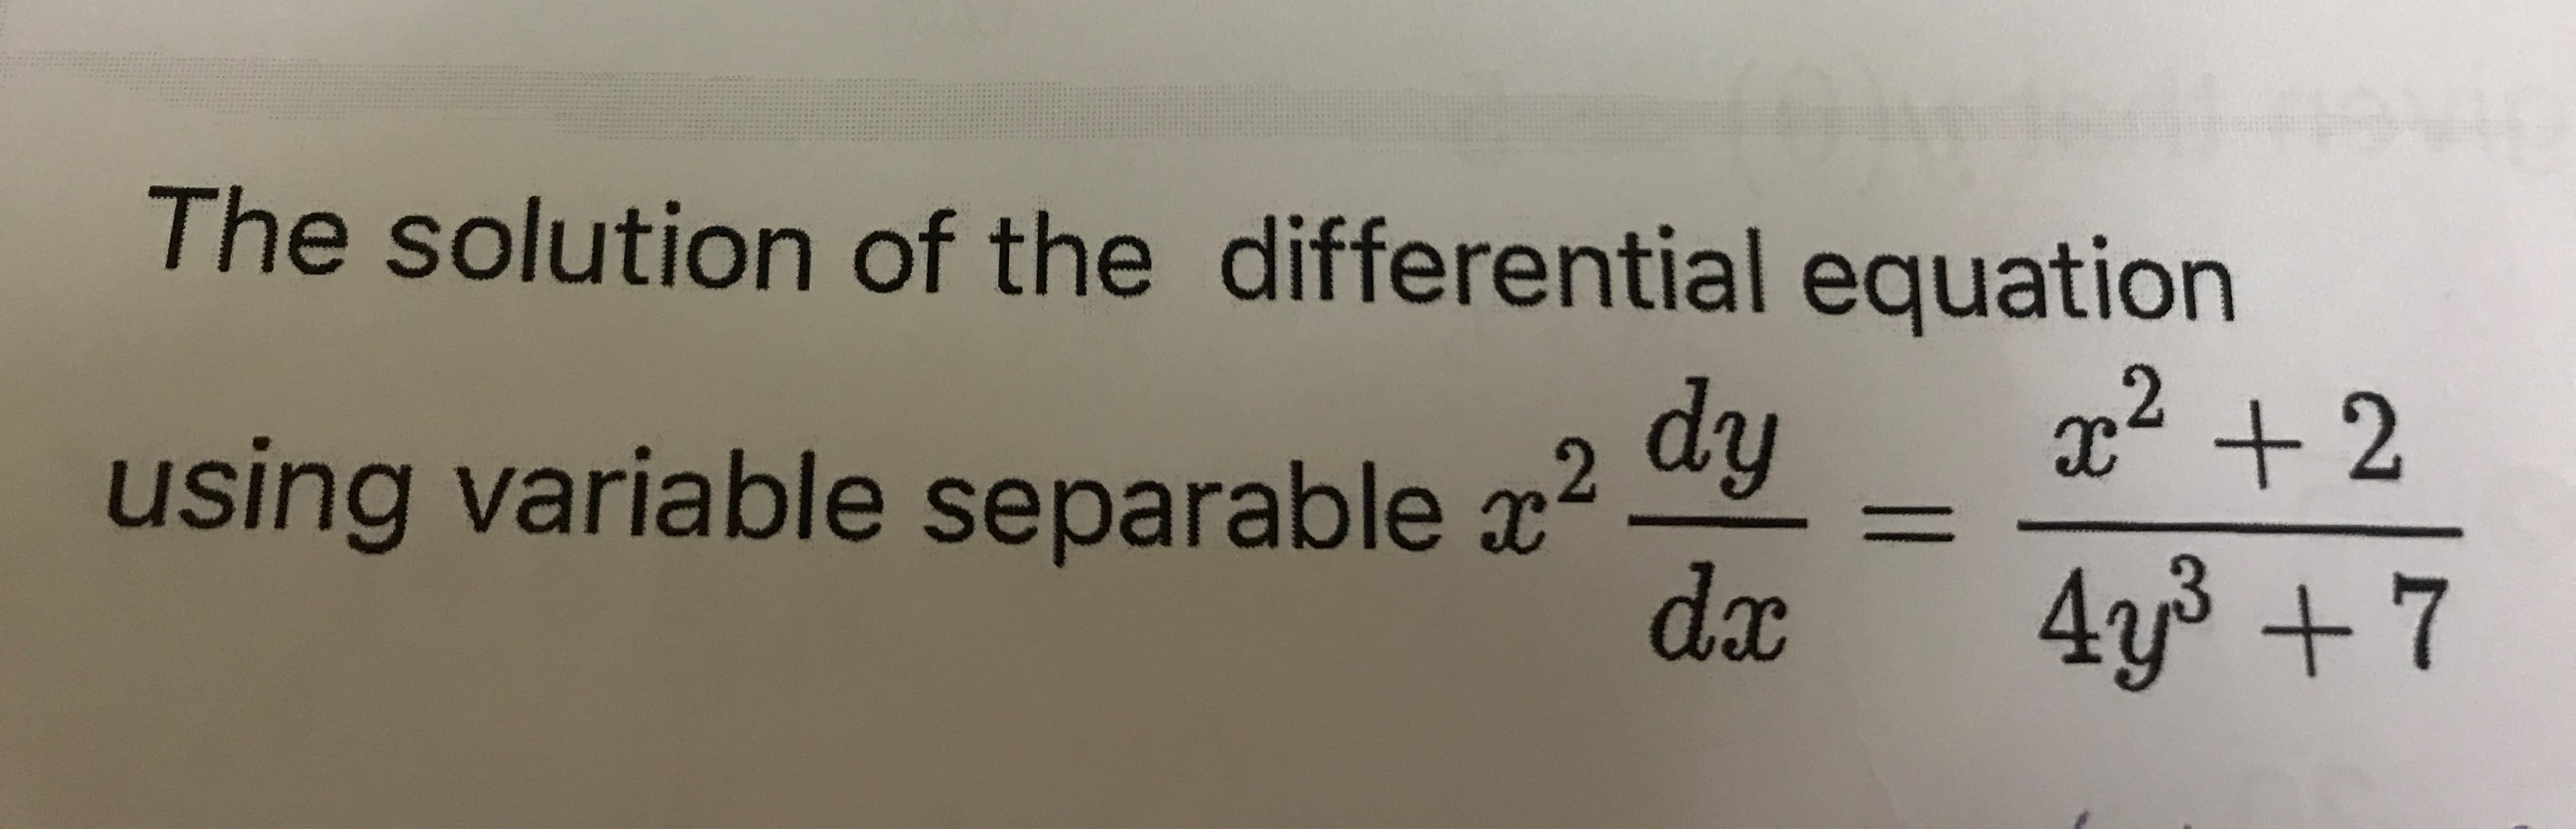 The solution of the differential equation
x2 + 2
dy
using variable separable x
dx
4y3 +7
